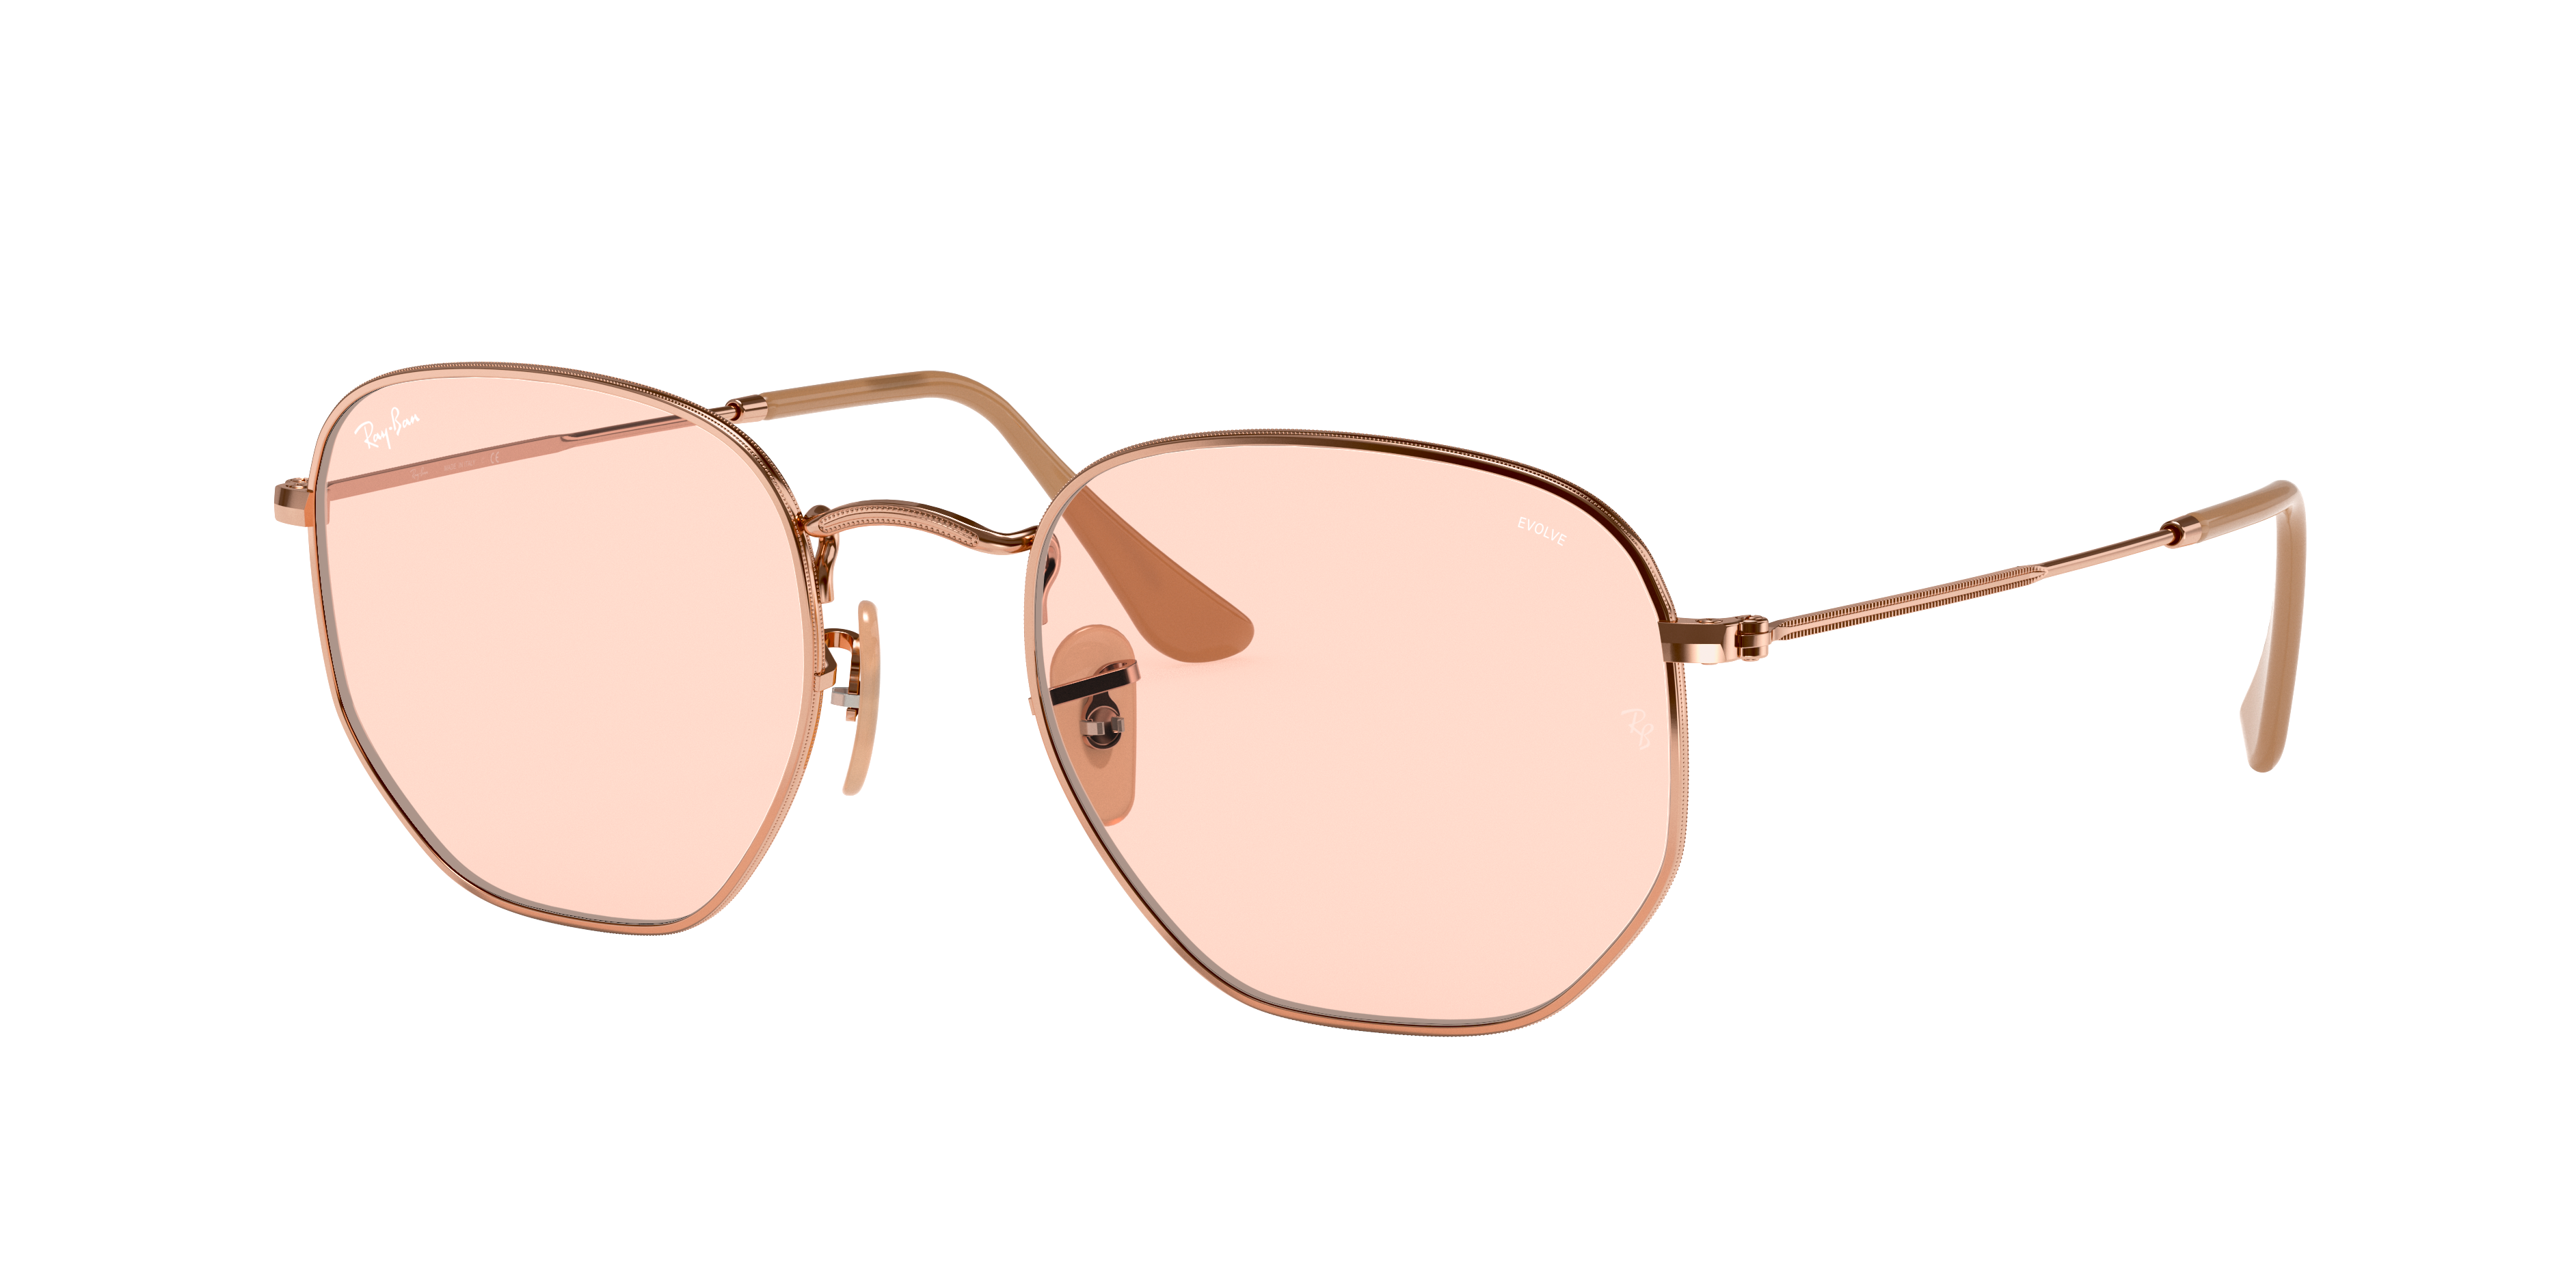 Hexagonal Washed Evolve Sunglasses in Copper and Pink Photochromic | Ray-Ban ®